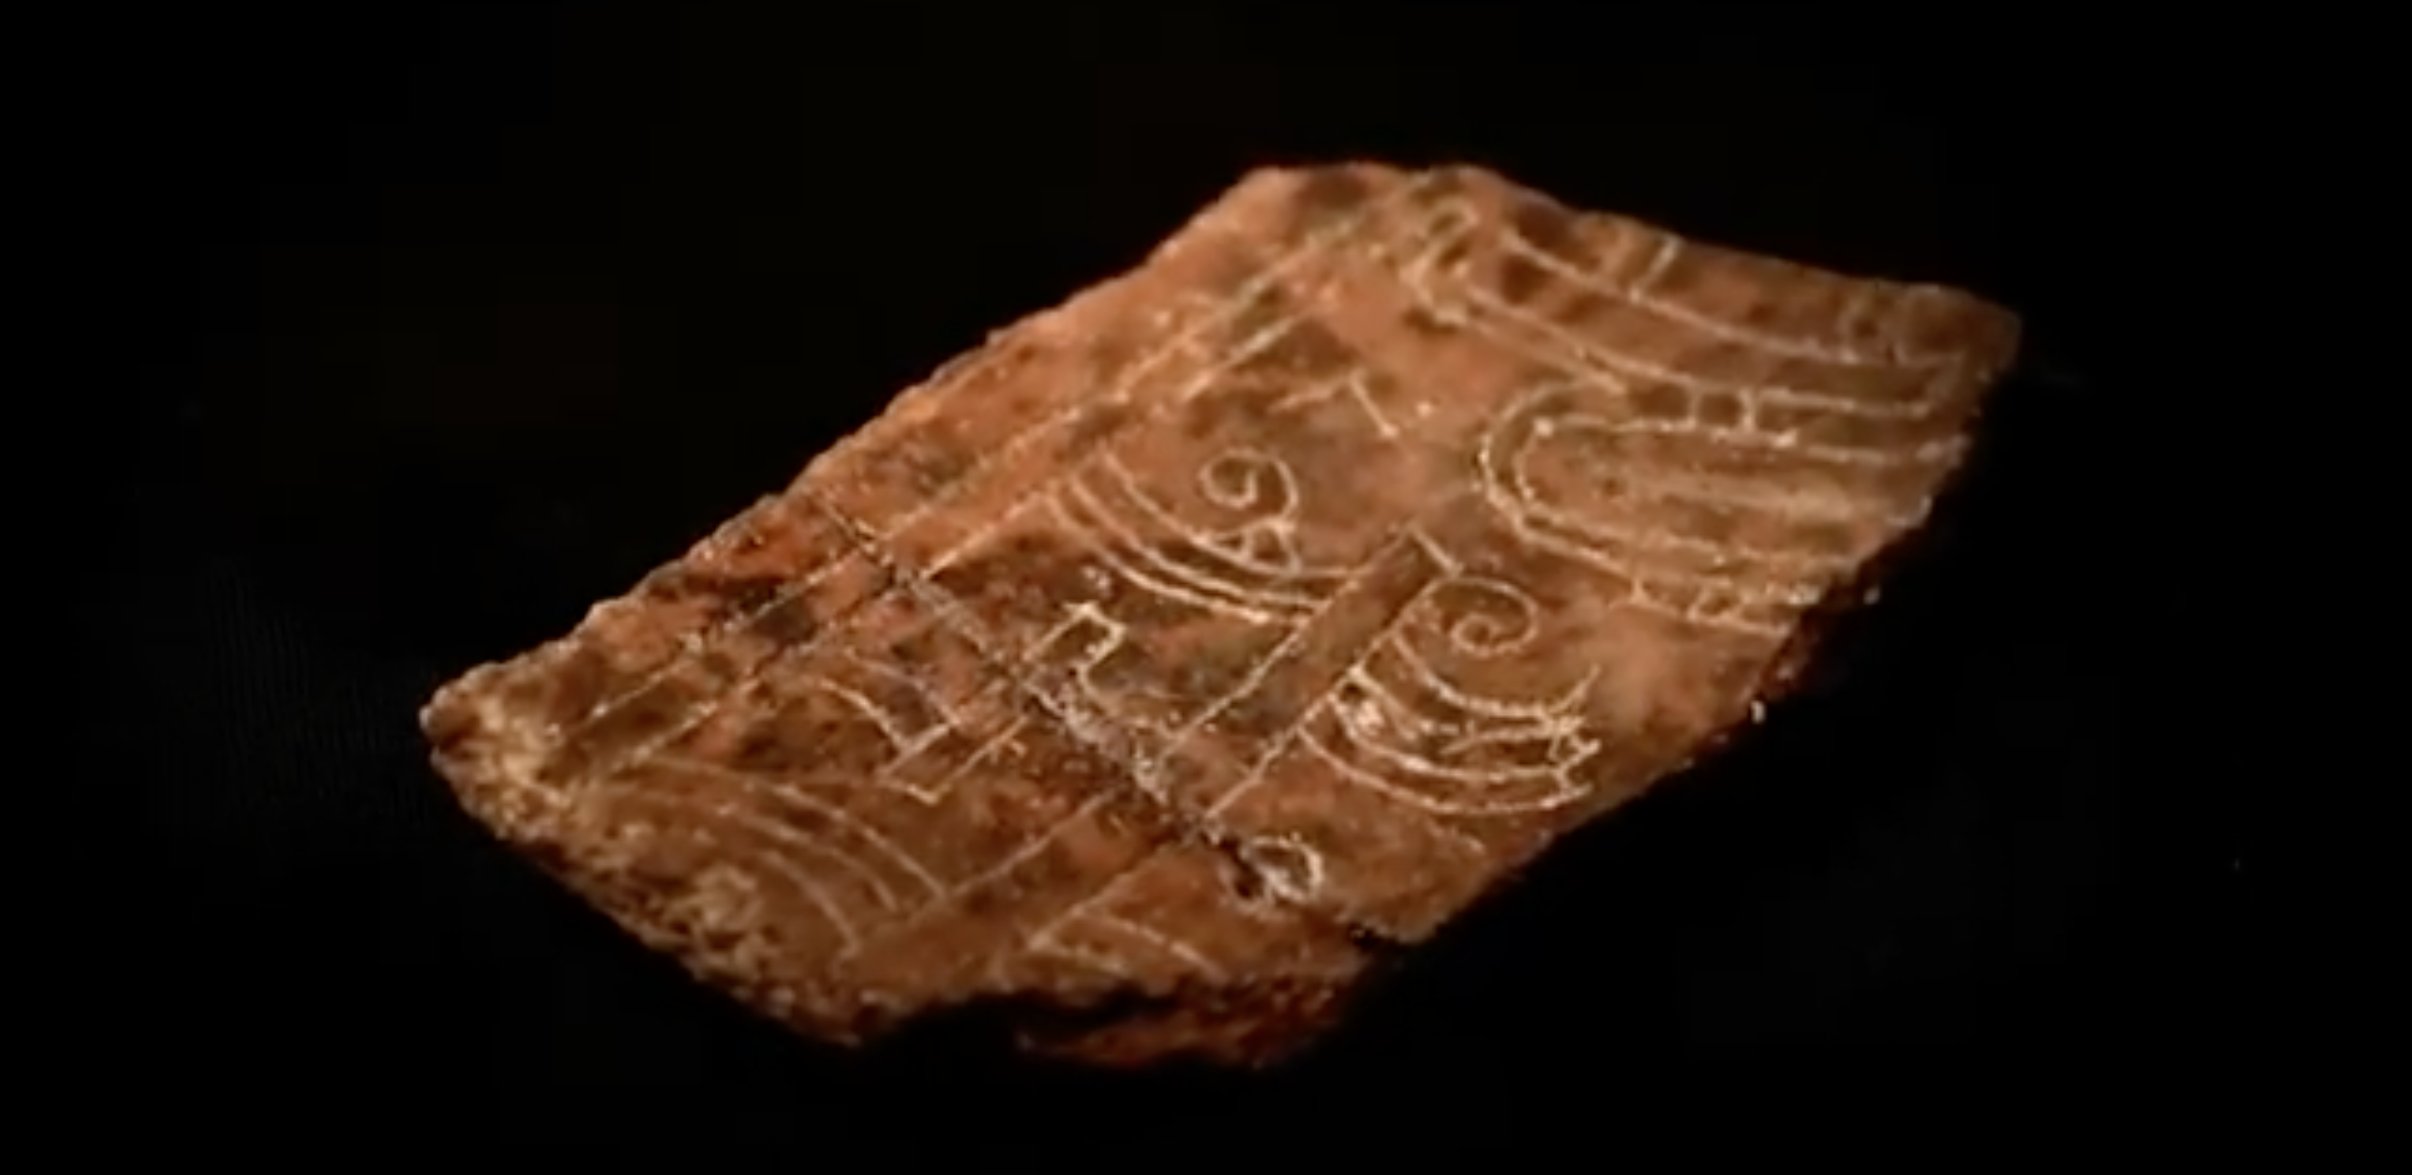 A fragment of pottery with an intricate design was found below Main Street. (Screenshot from the Charlotte Amalie Saladoid Excavation documentary)